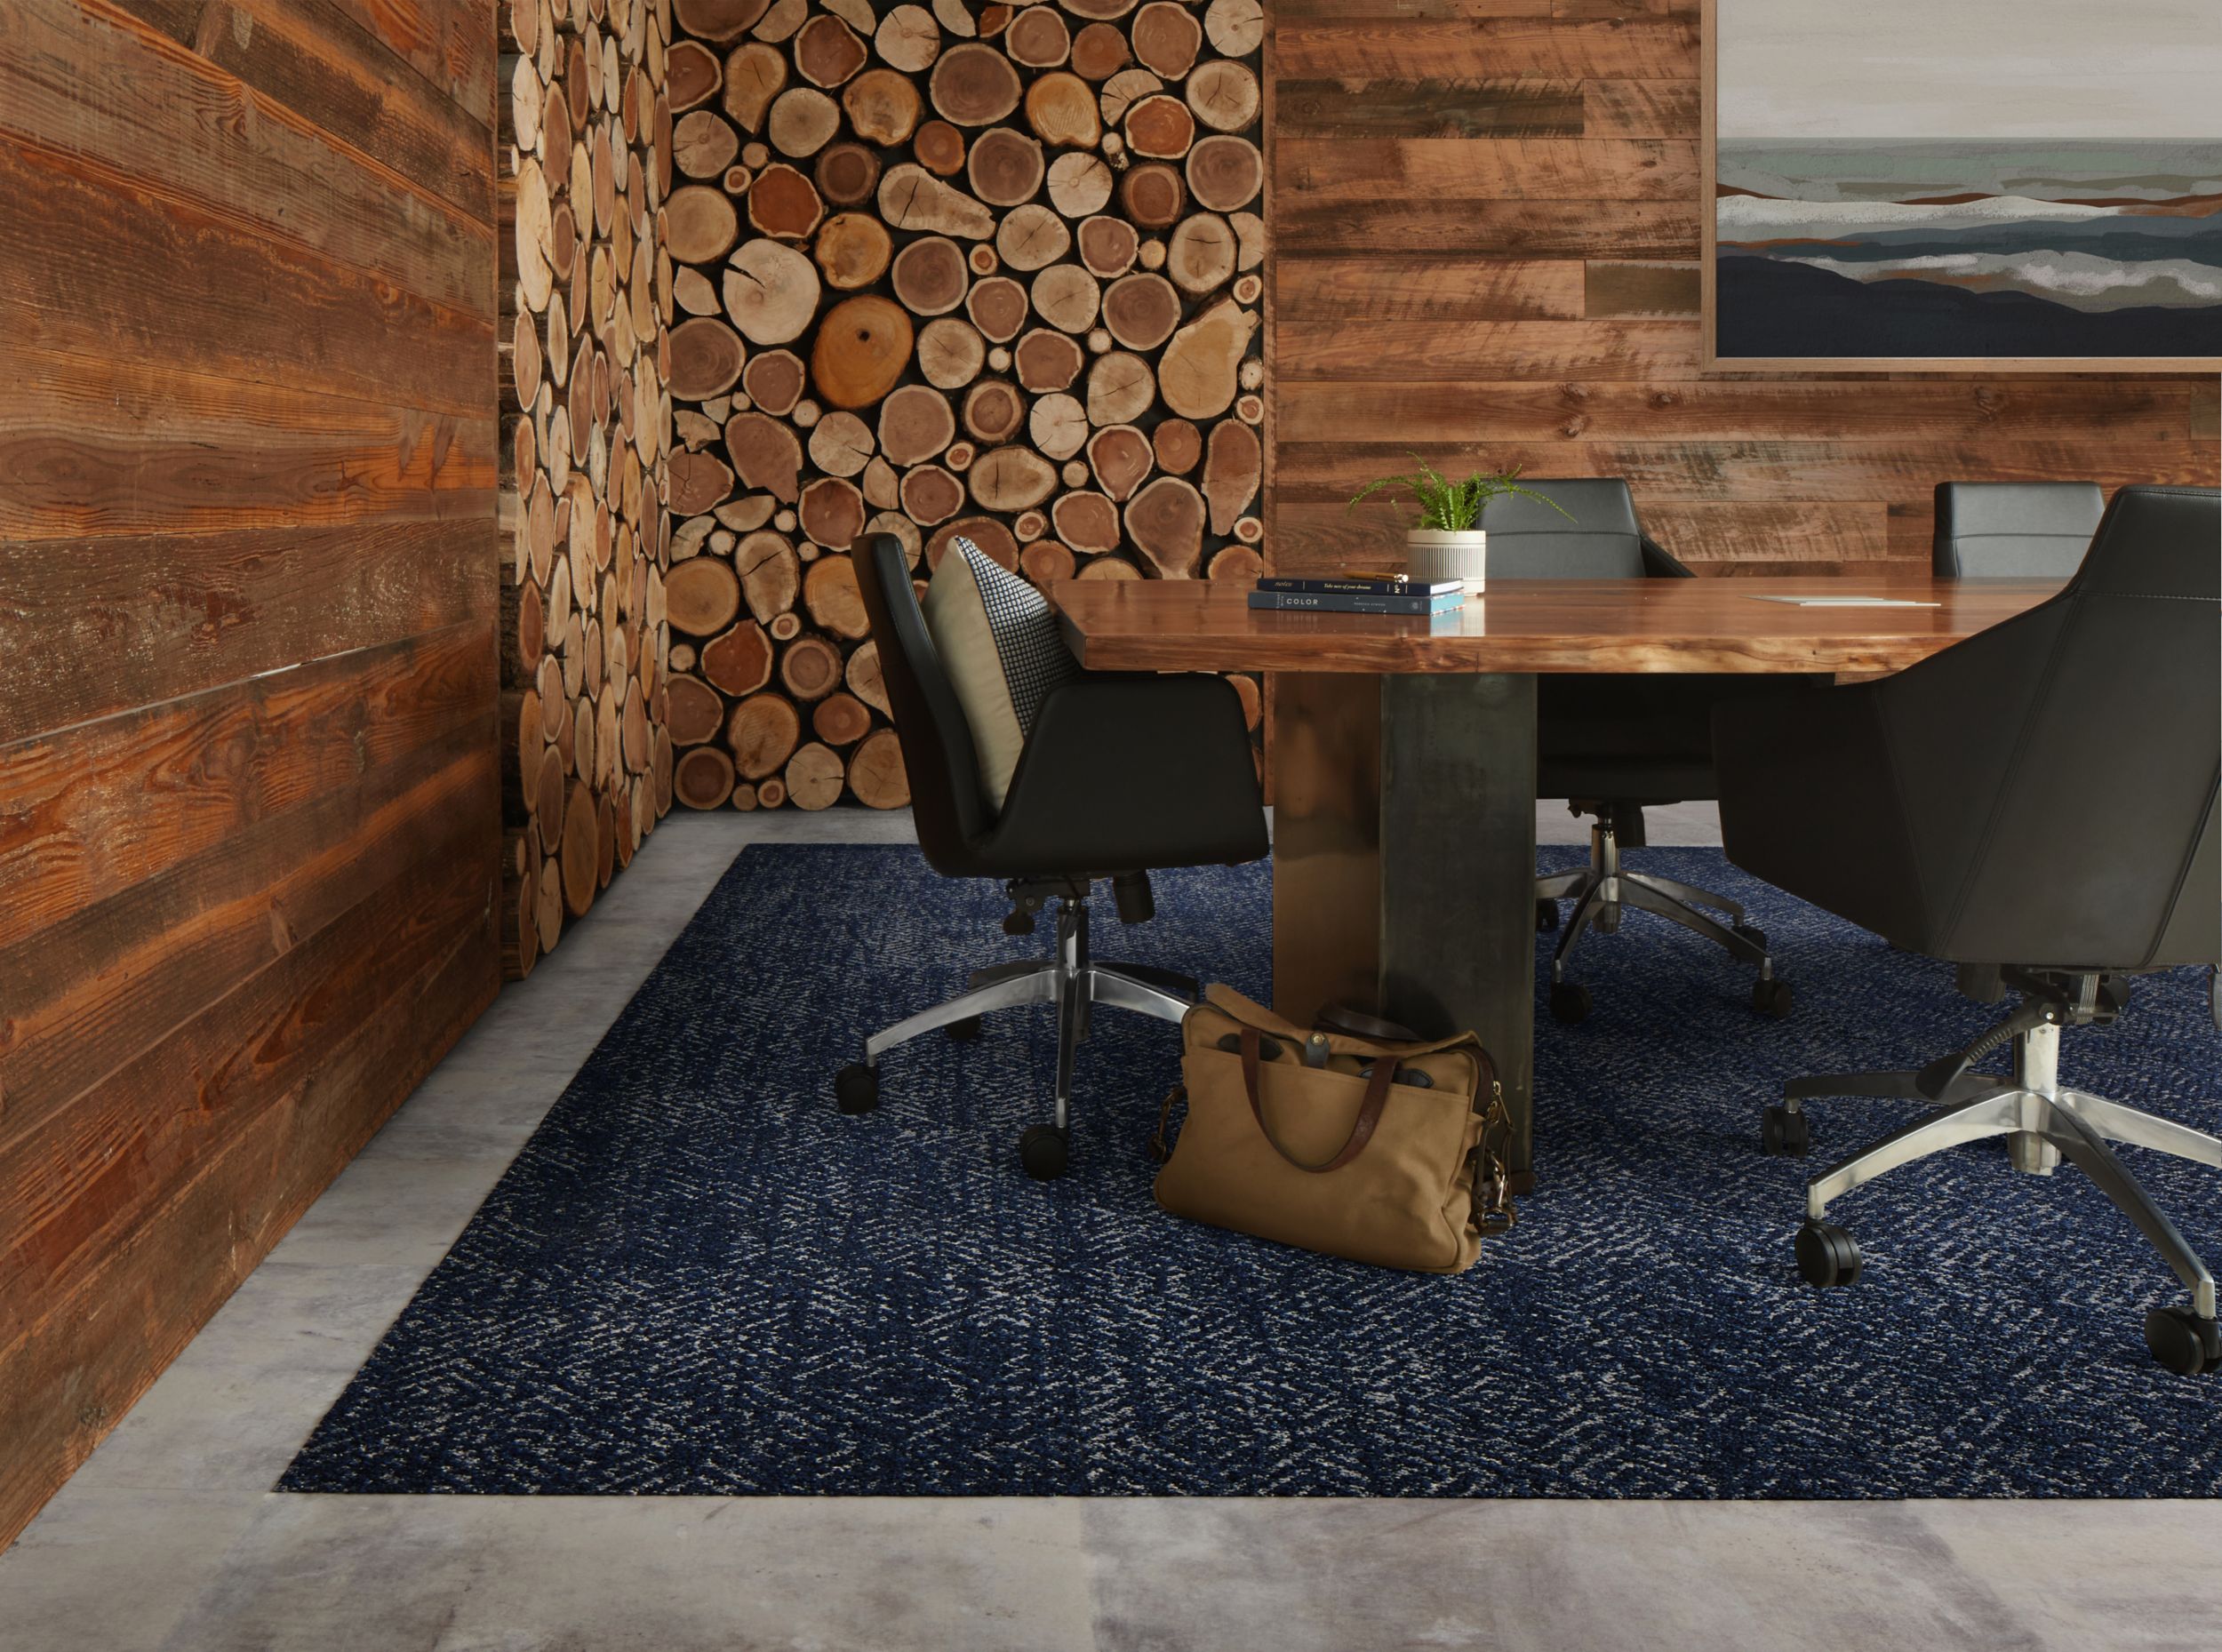 Interface Third Space 309 carpet tile with Textured Stones LVT in meeting room with wood walls and accents imagen número 3